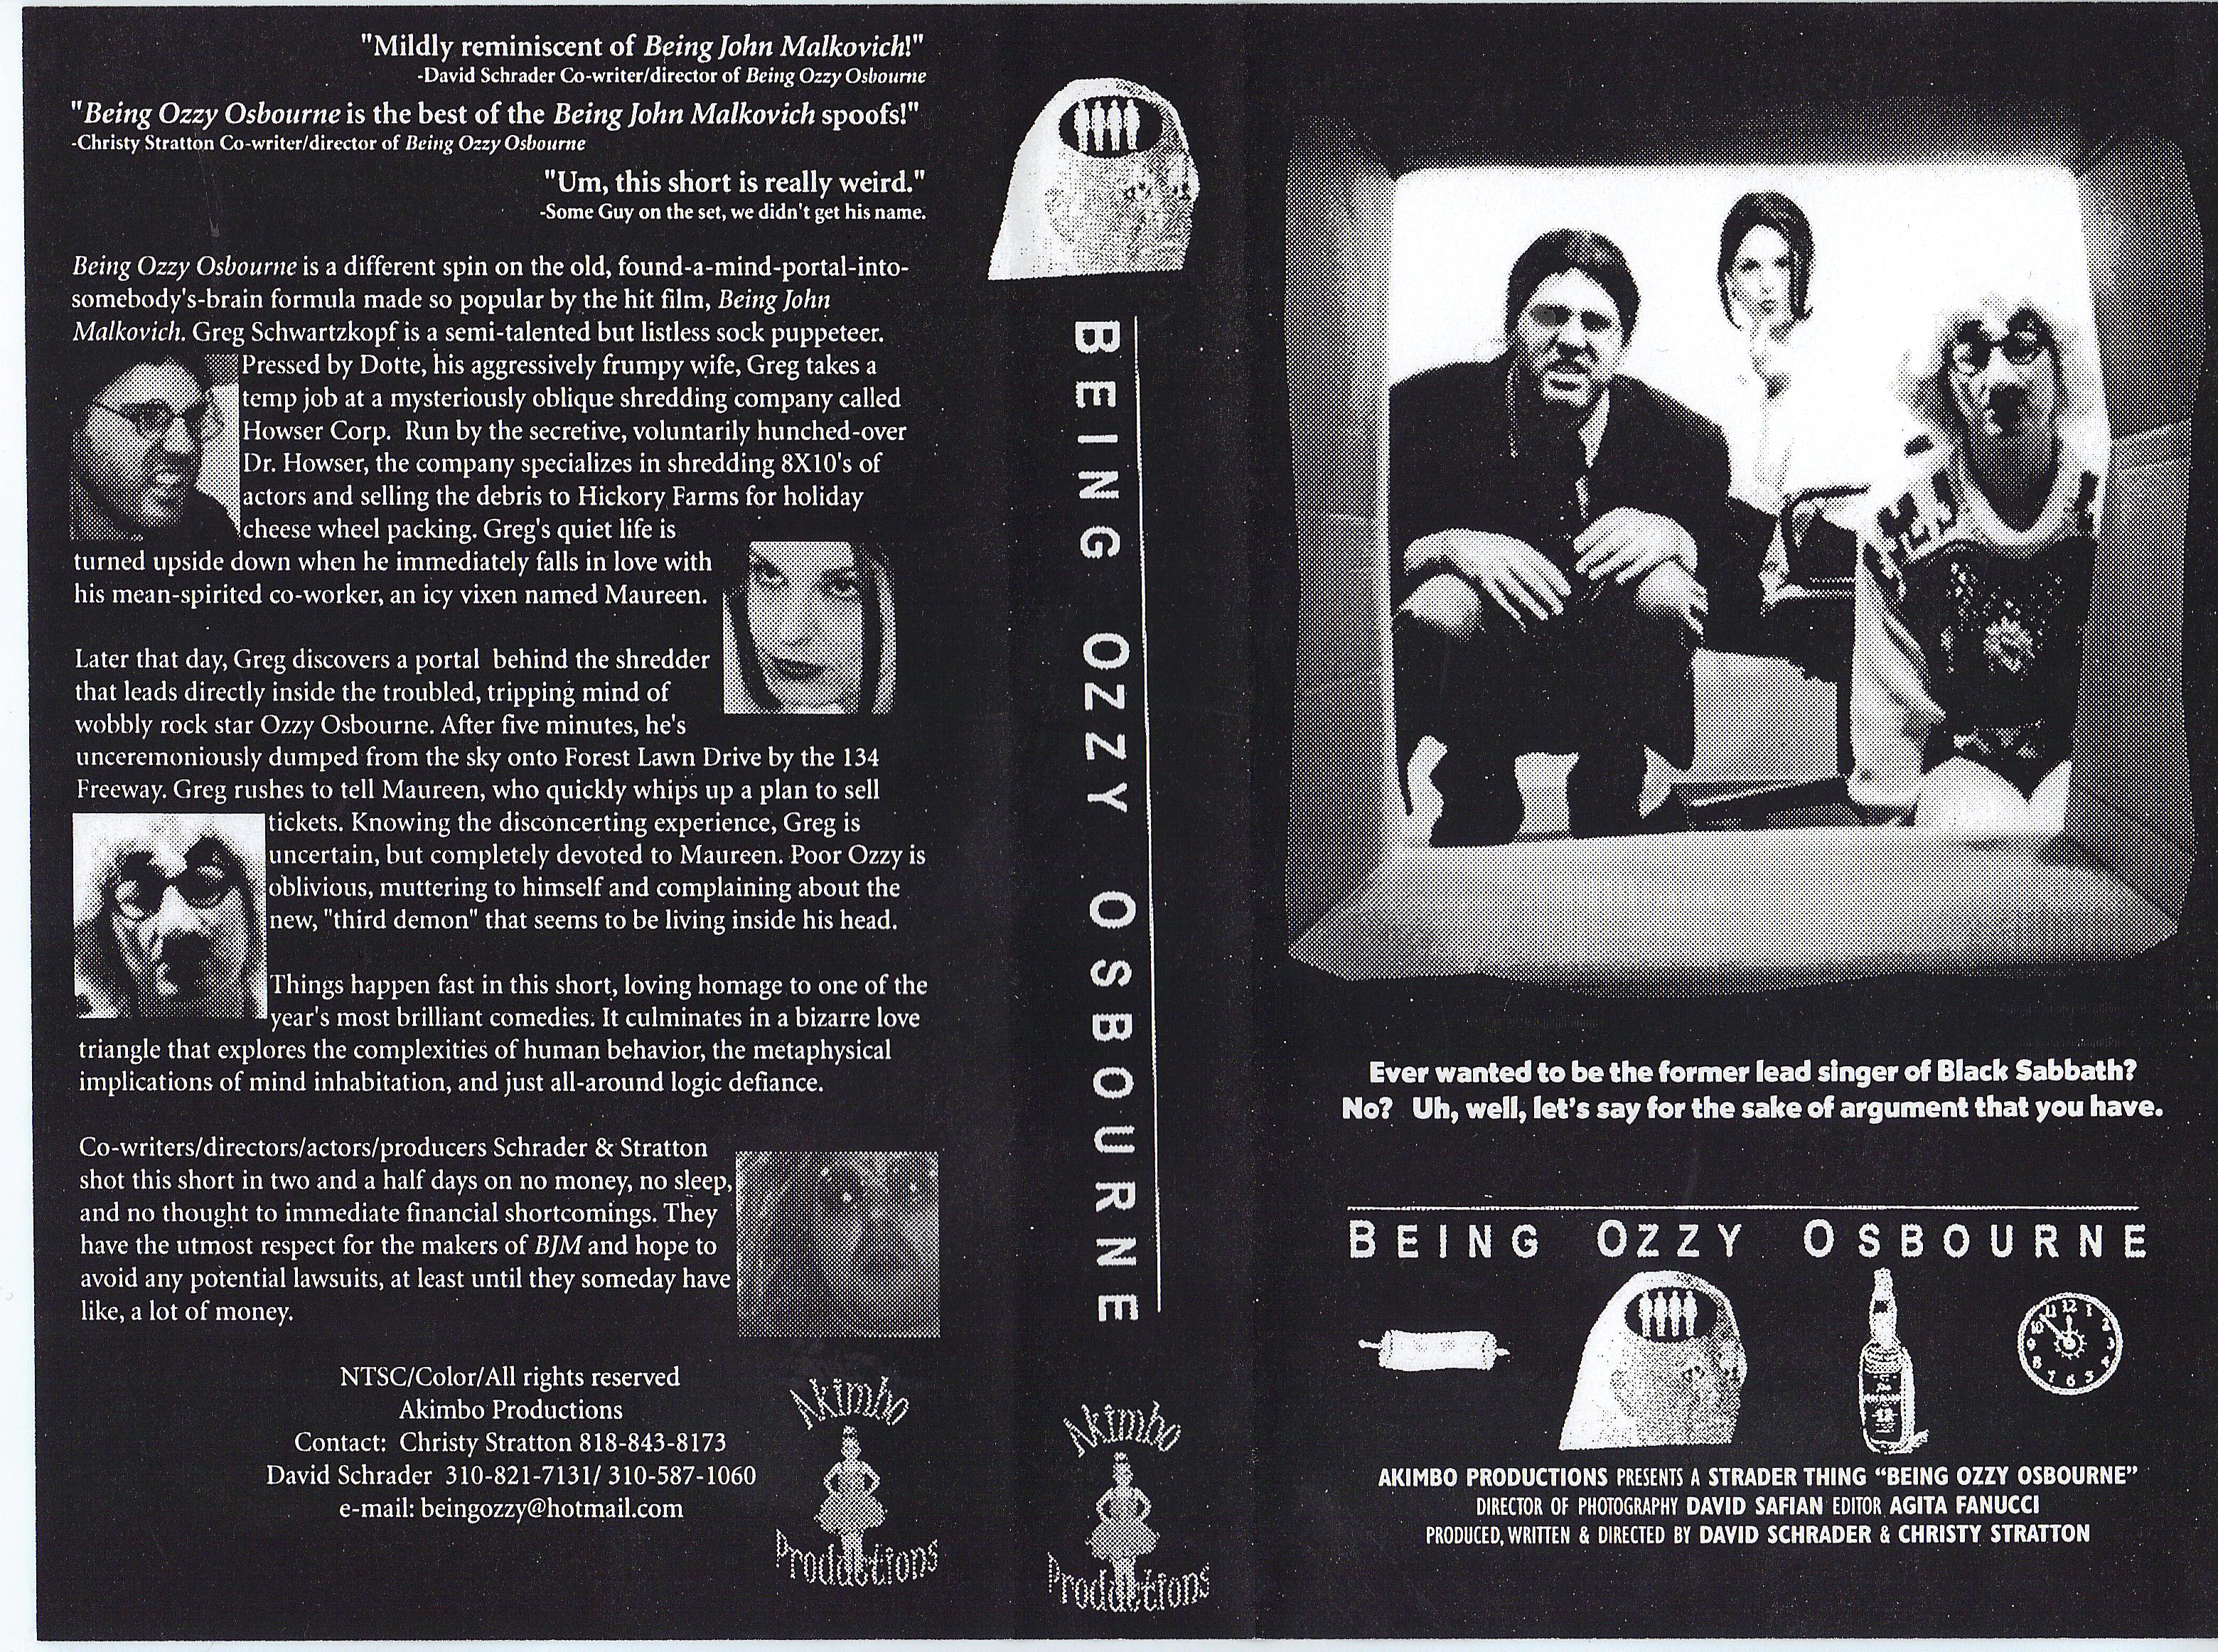 Ancient VHS cover for Being Ozzy Osbourne (2000)